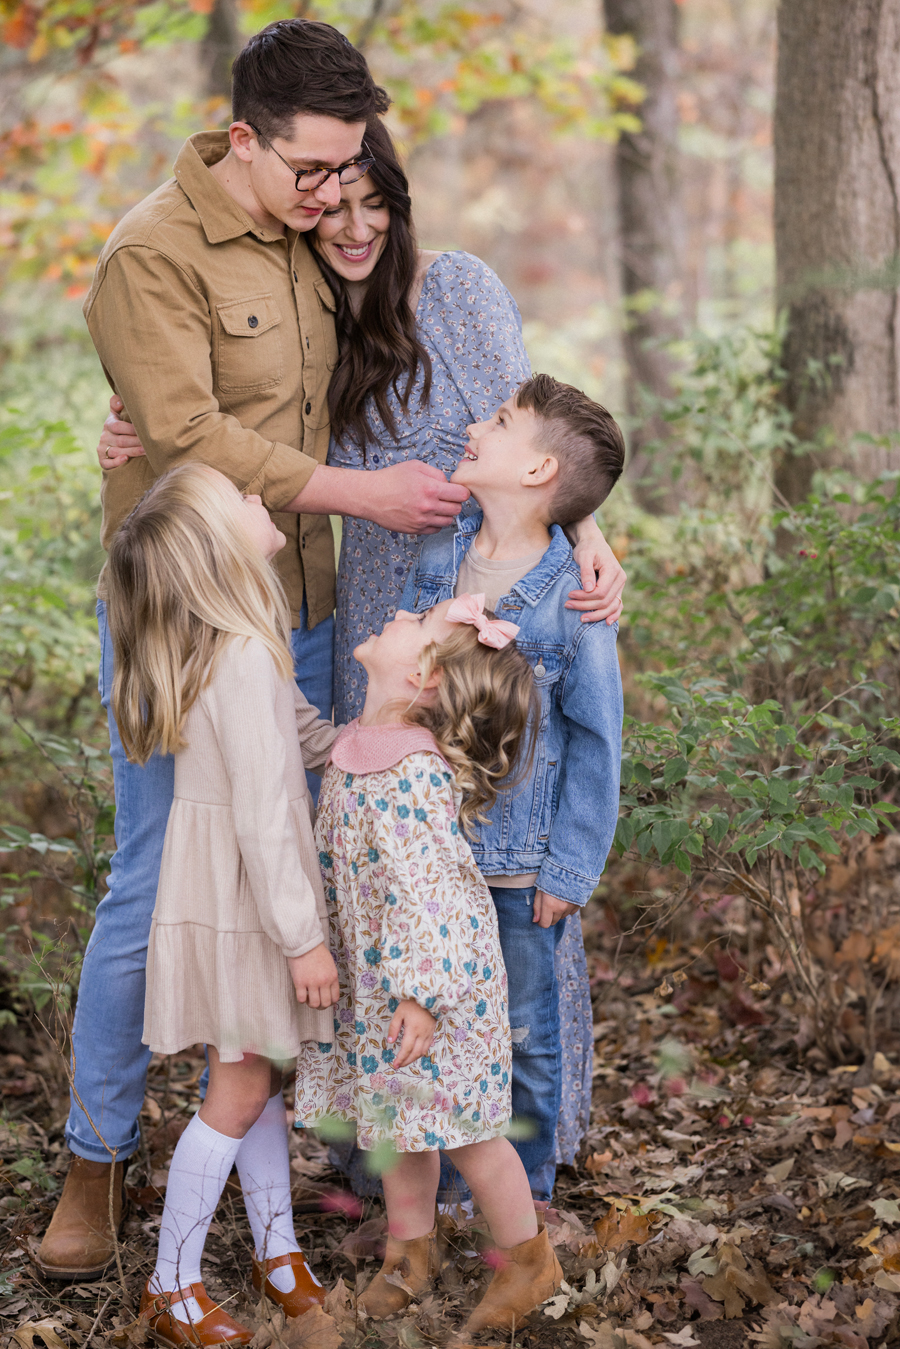 A rainy family portrait session in Columbia, Missouri by Love Tree Studios.